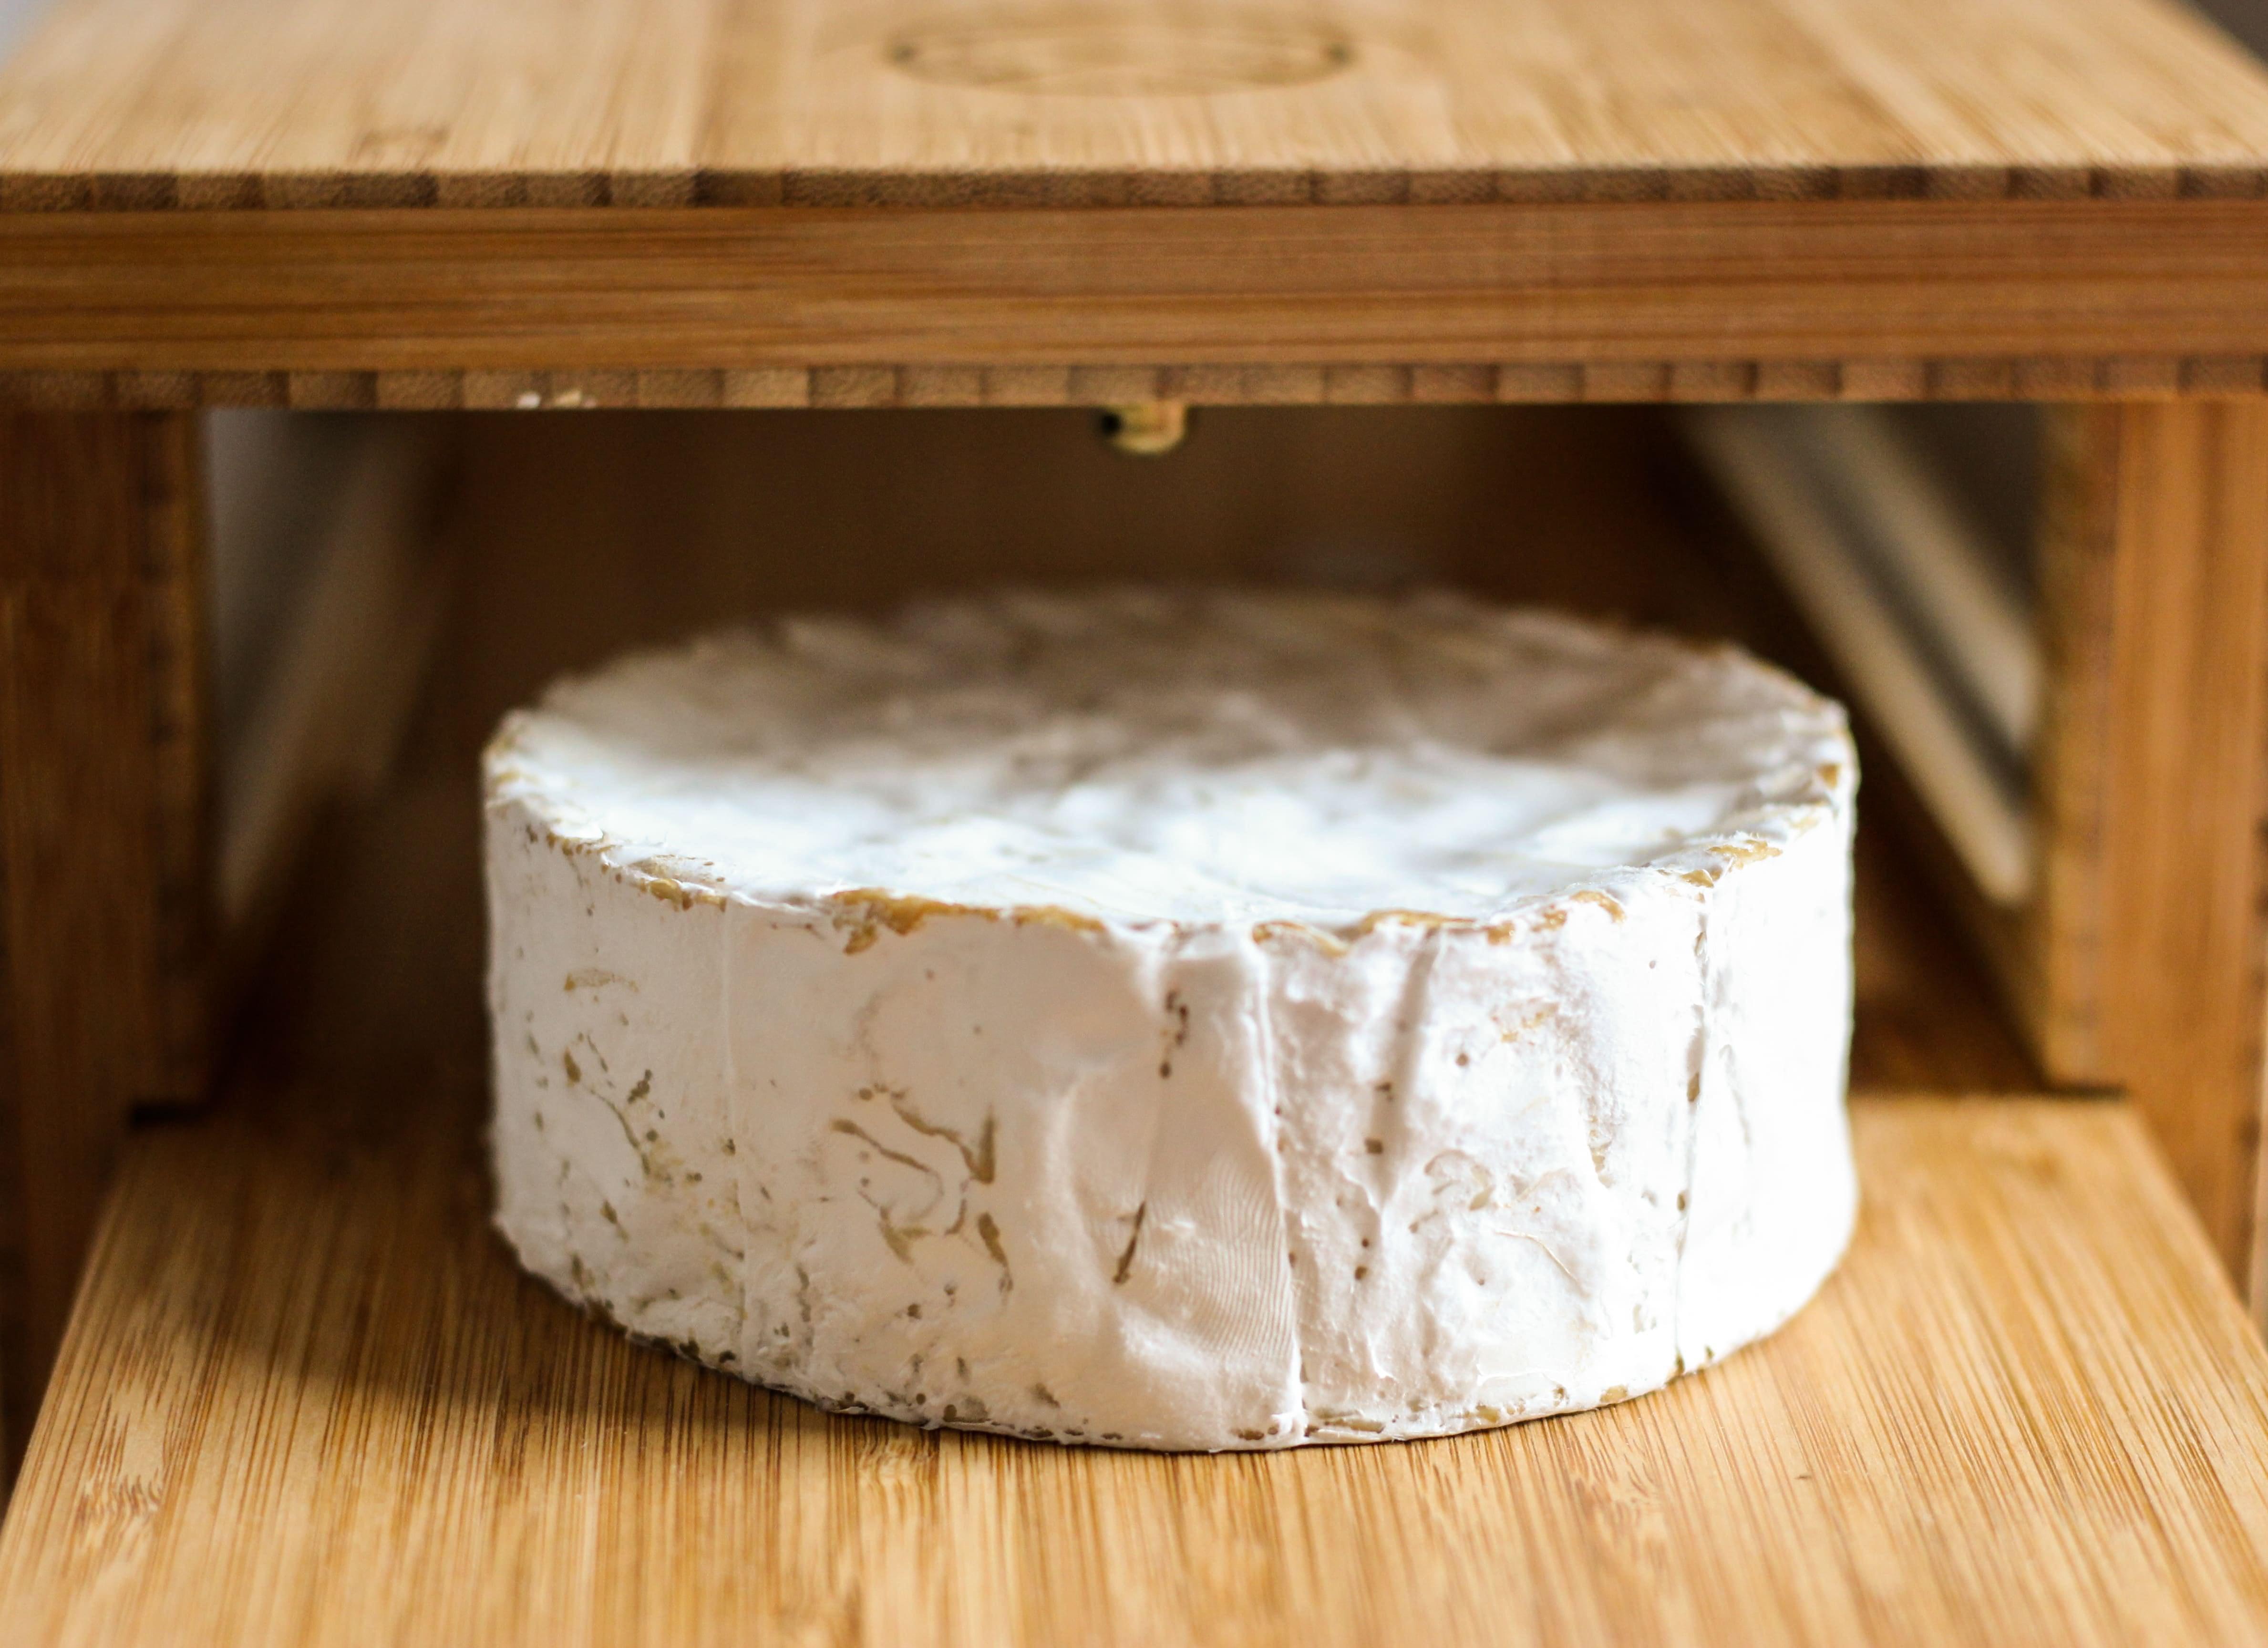 What's the Different Between Brie and Camembert Cheese?